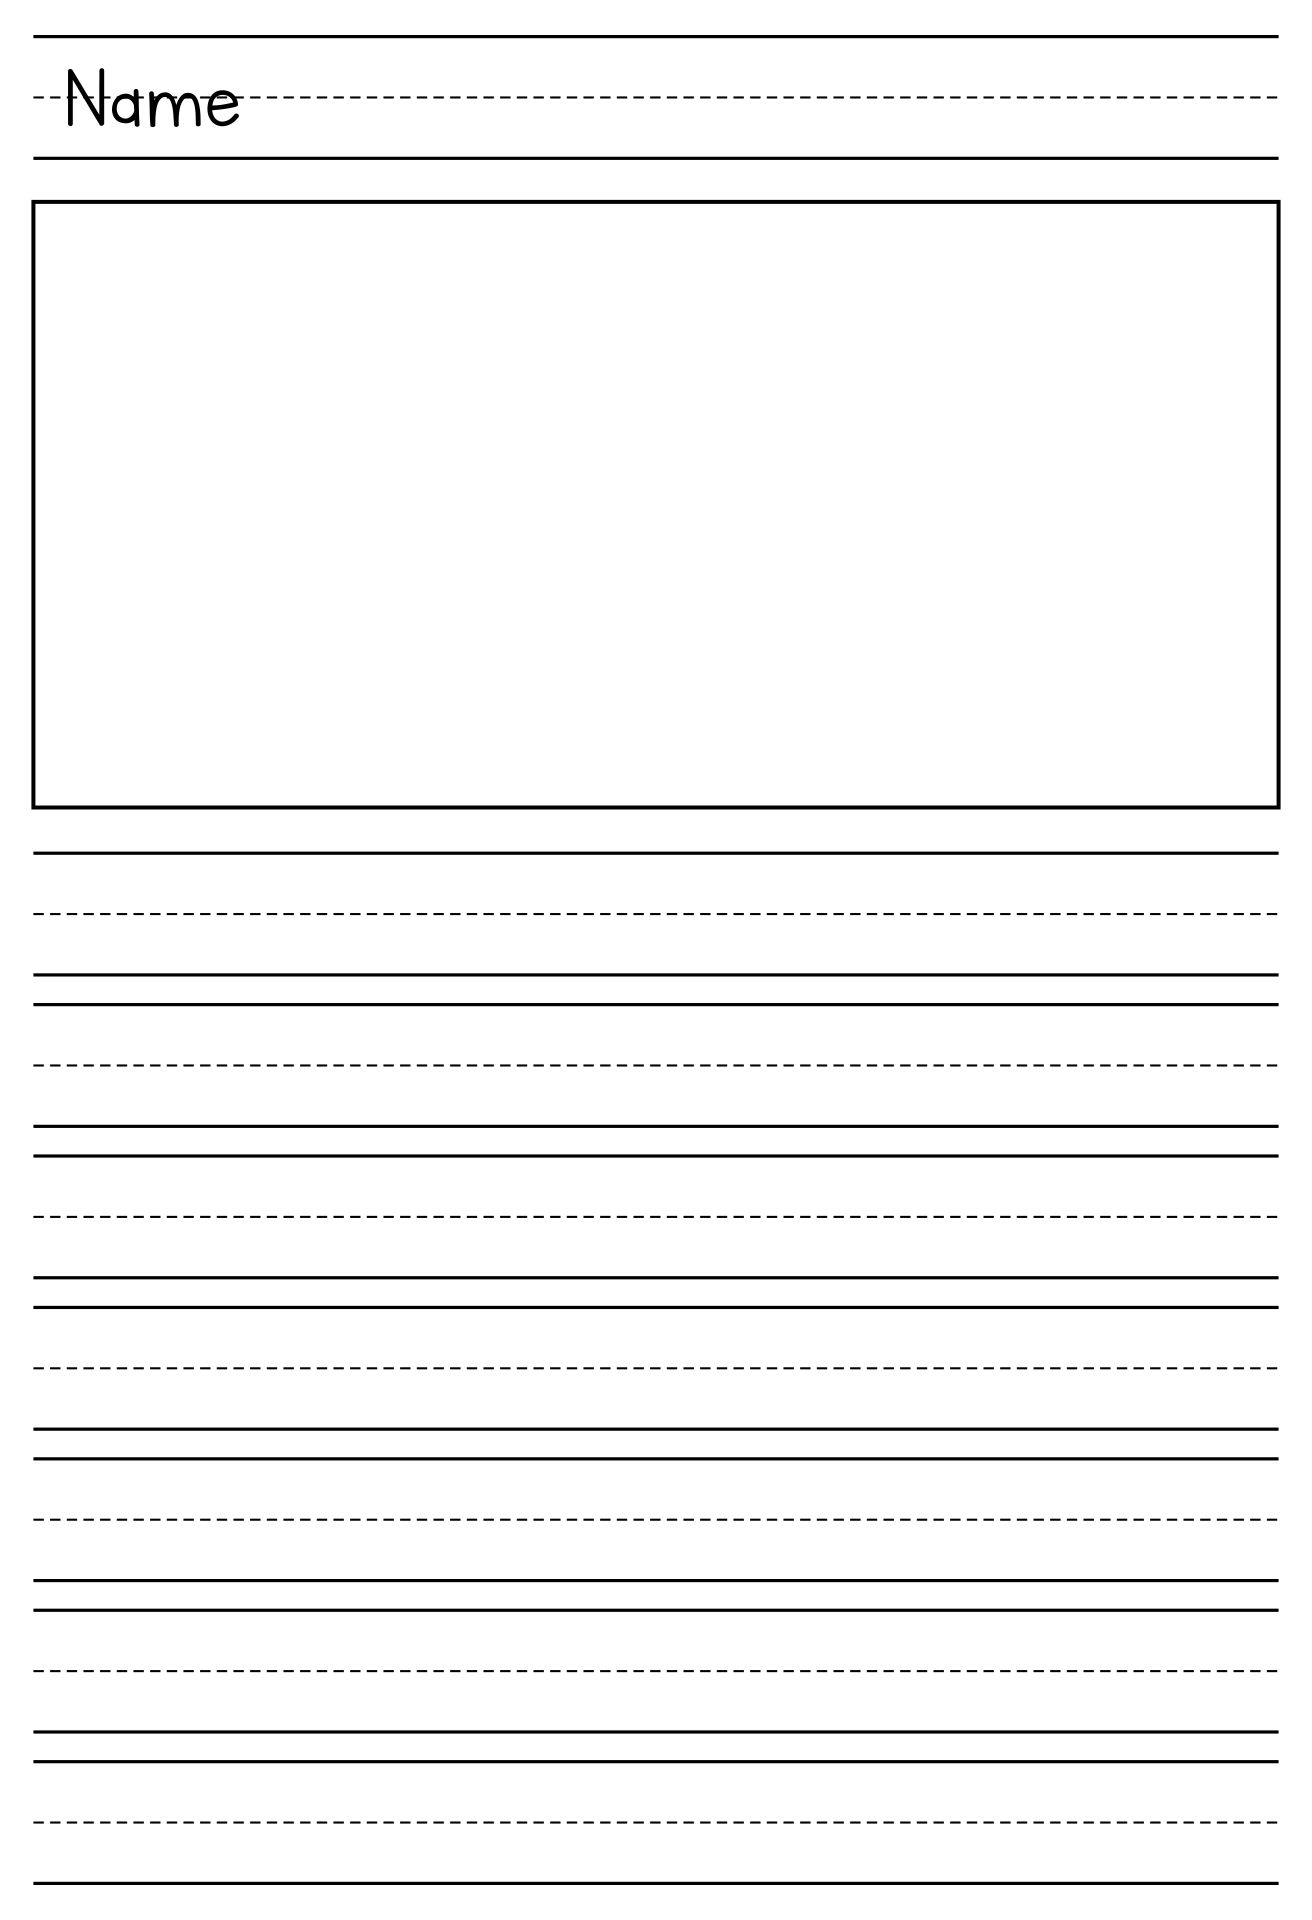 Free Printable Lined Paper Kindergarten Printable Form Templates And Letter